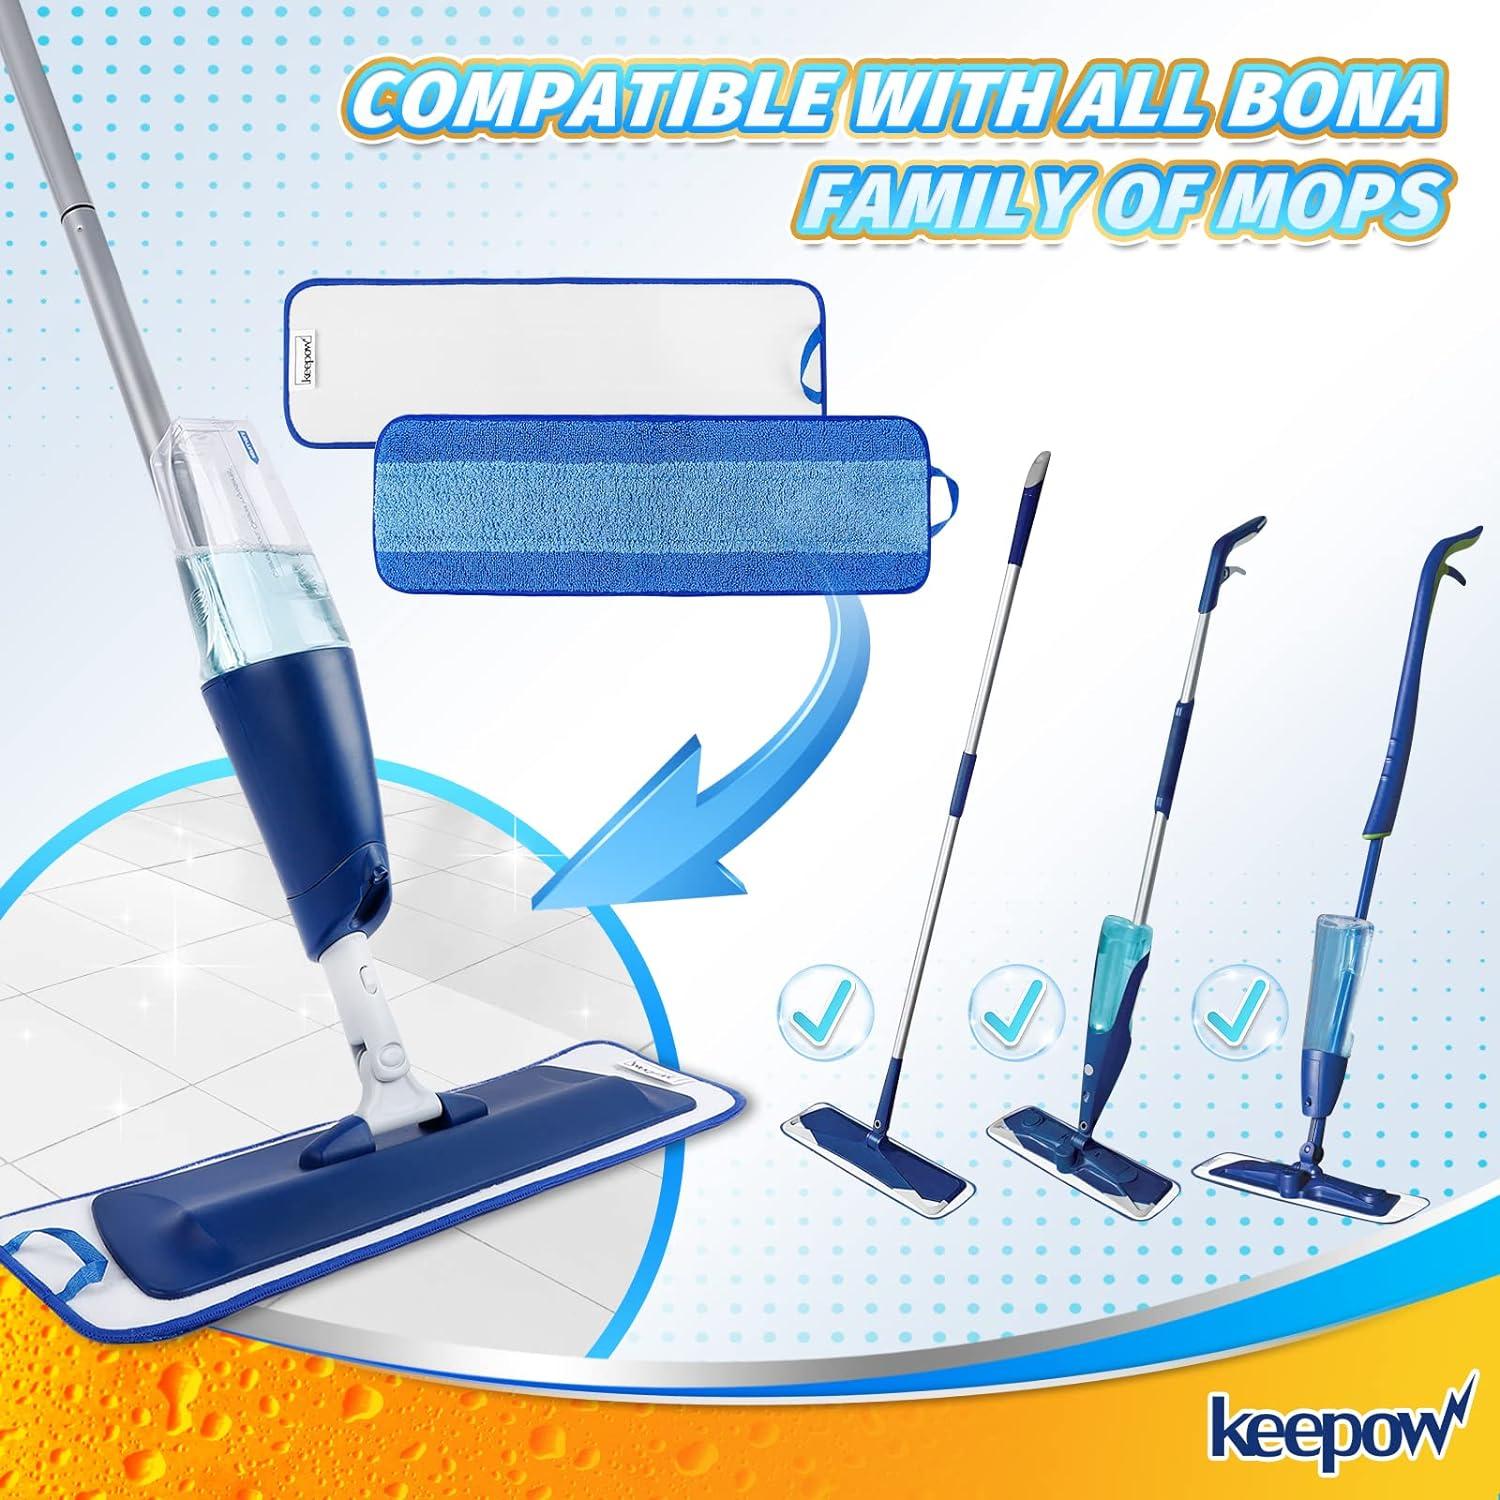 Bona Premium Pet Microfiber Mop for Multi-Surface Floors with Washable  Sweeping Pad